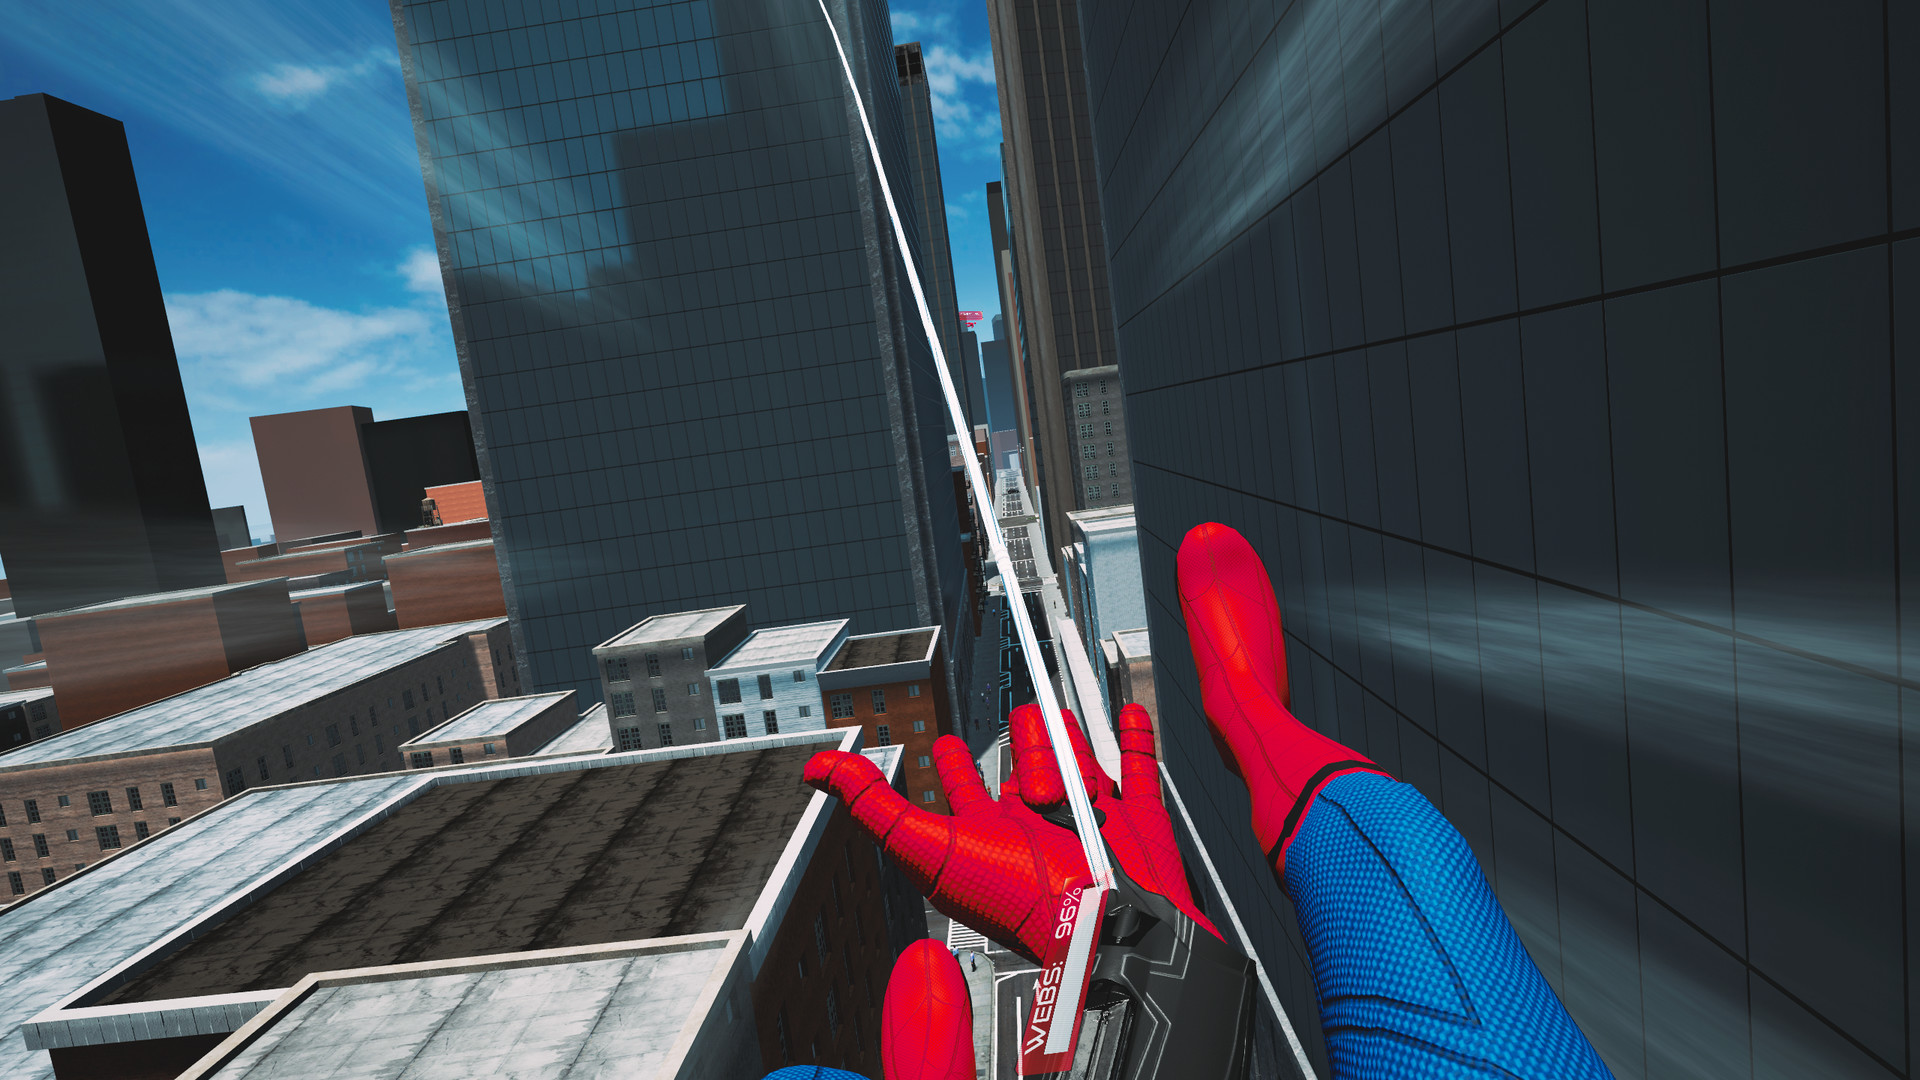 spider man vr review